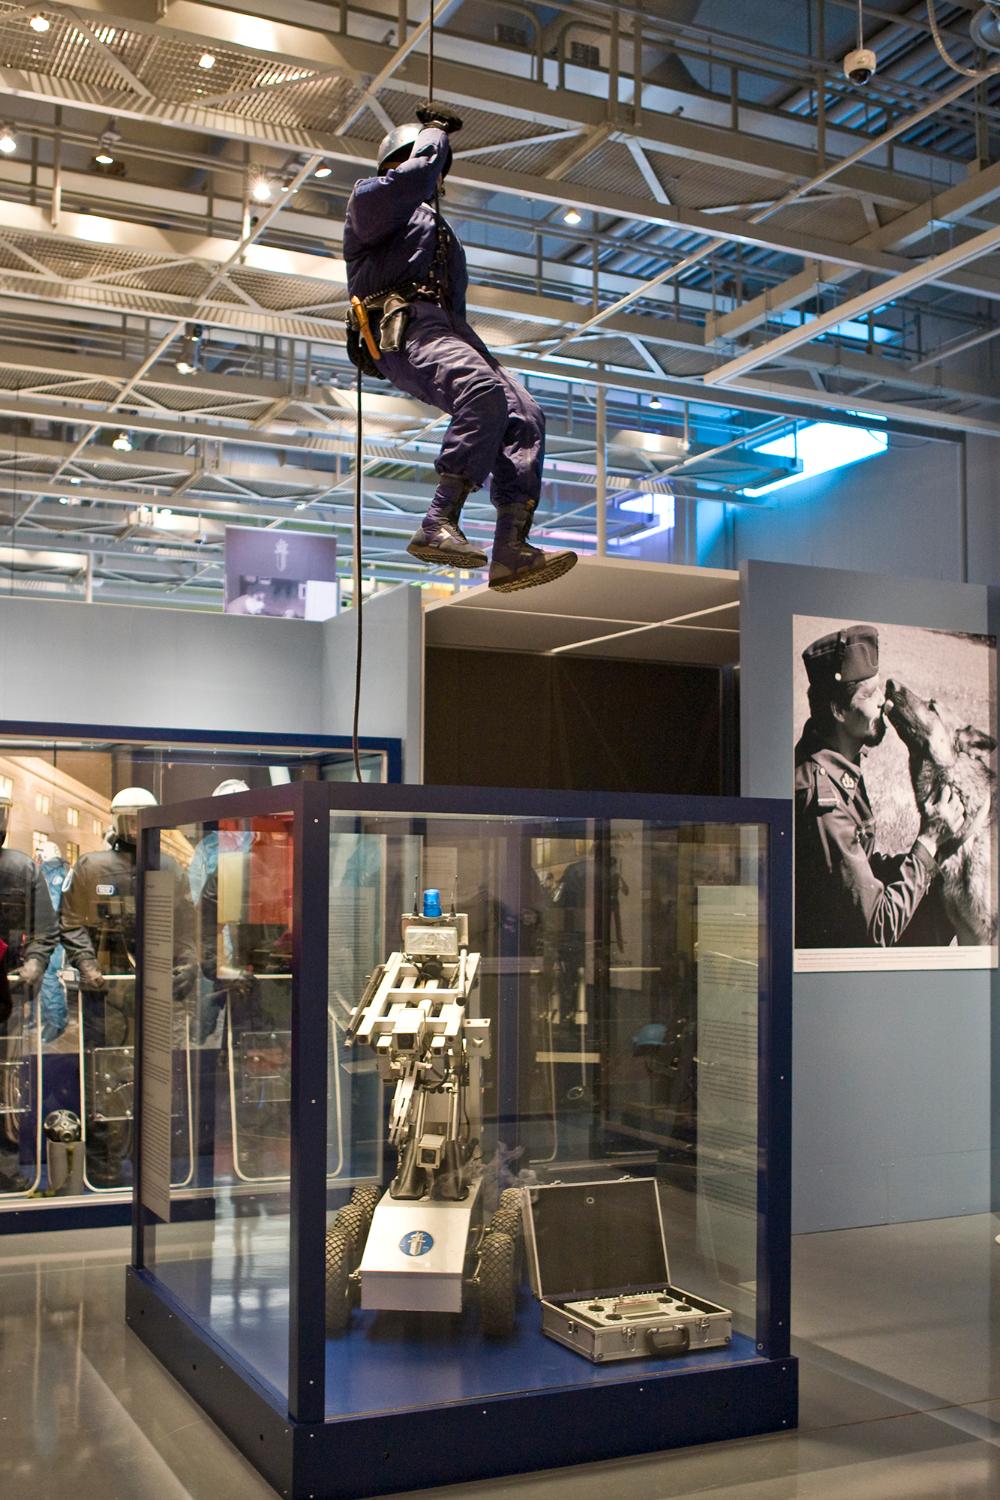 The exhibition displayed a bomb disposal robot and a police dummy of the National Special Intervention Unit ‘Karhu’, hanging on a rope from the ceiling.